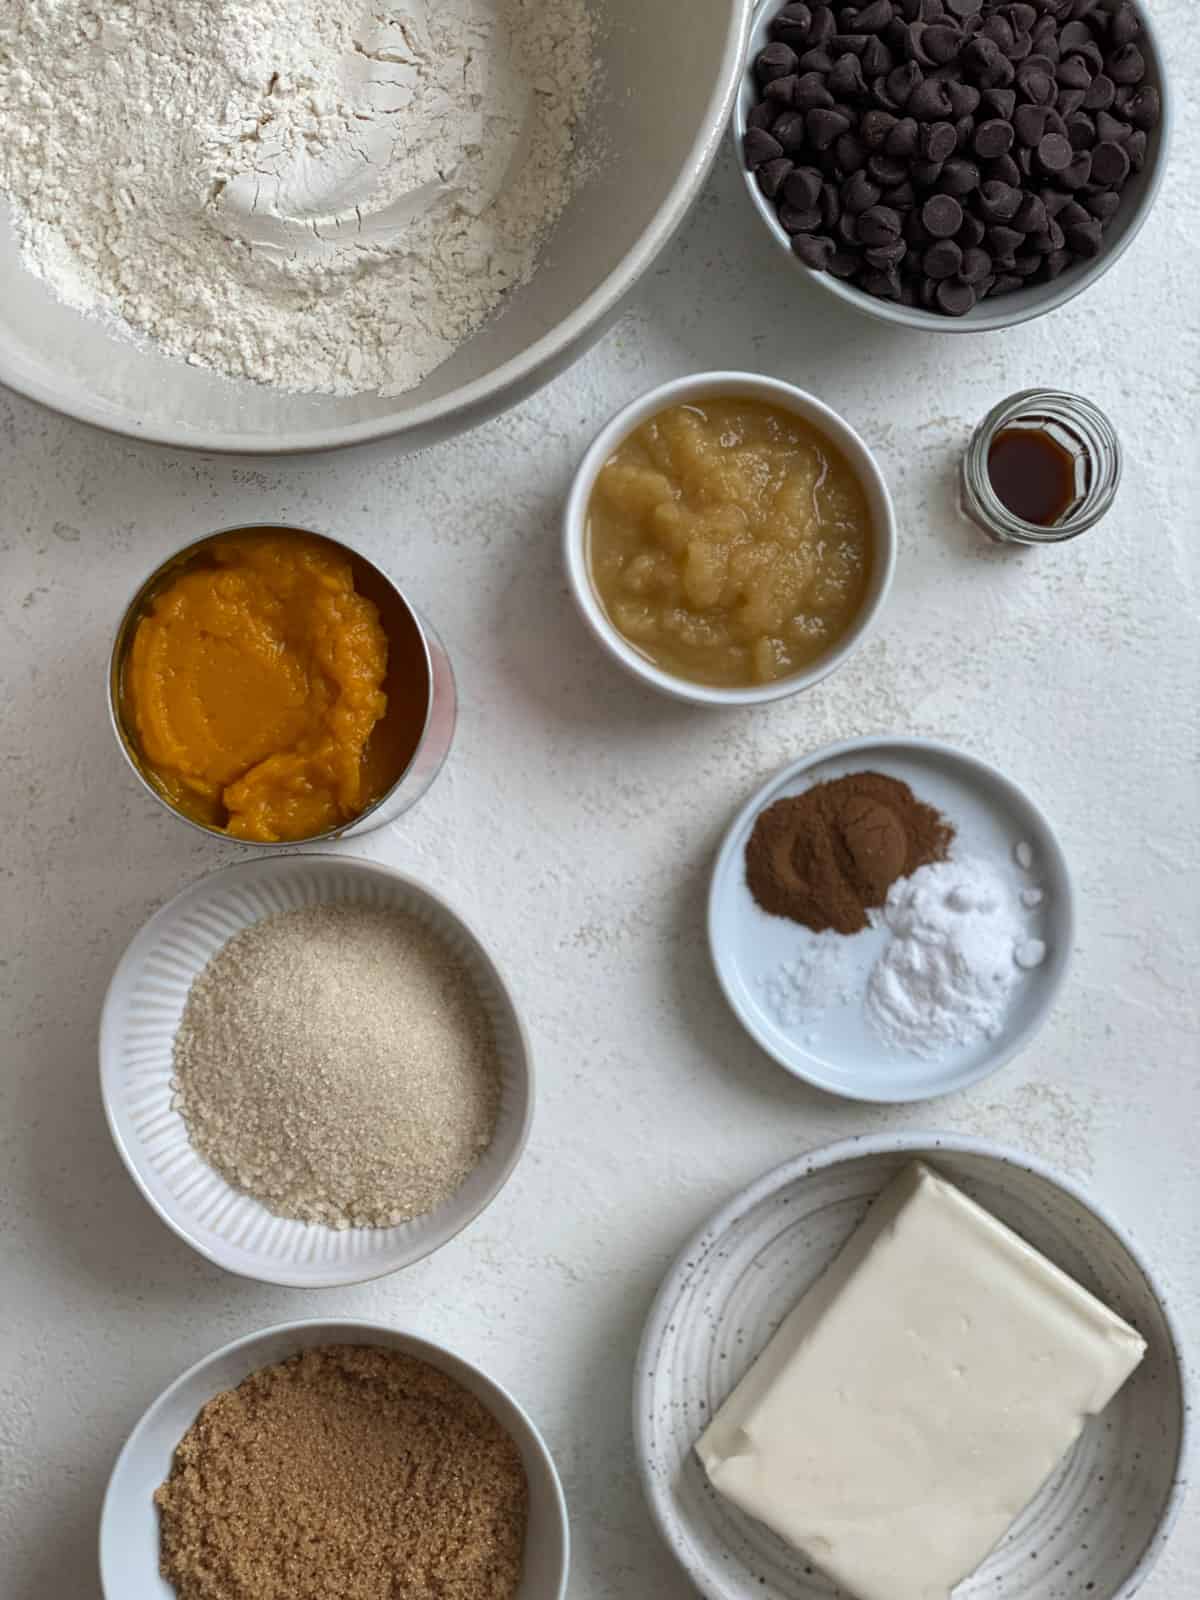 ingredients for Vegan Pumpkin Chocolate Chip Cookies measured out against a white surface